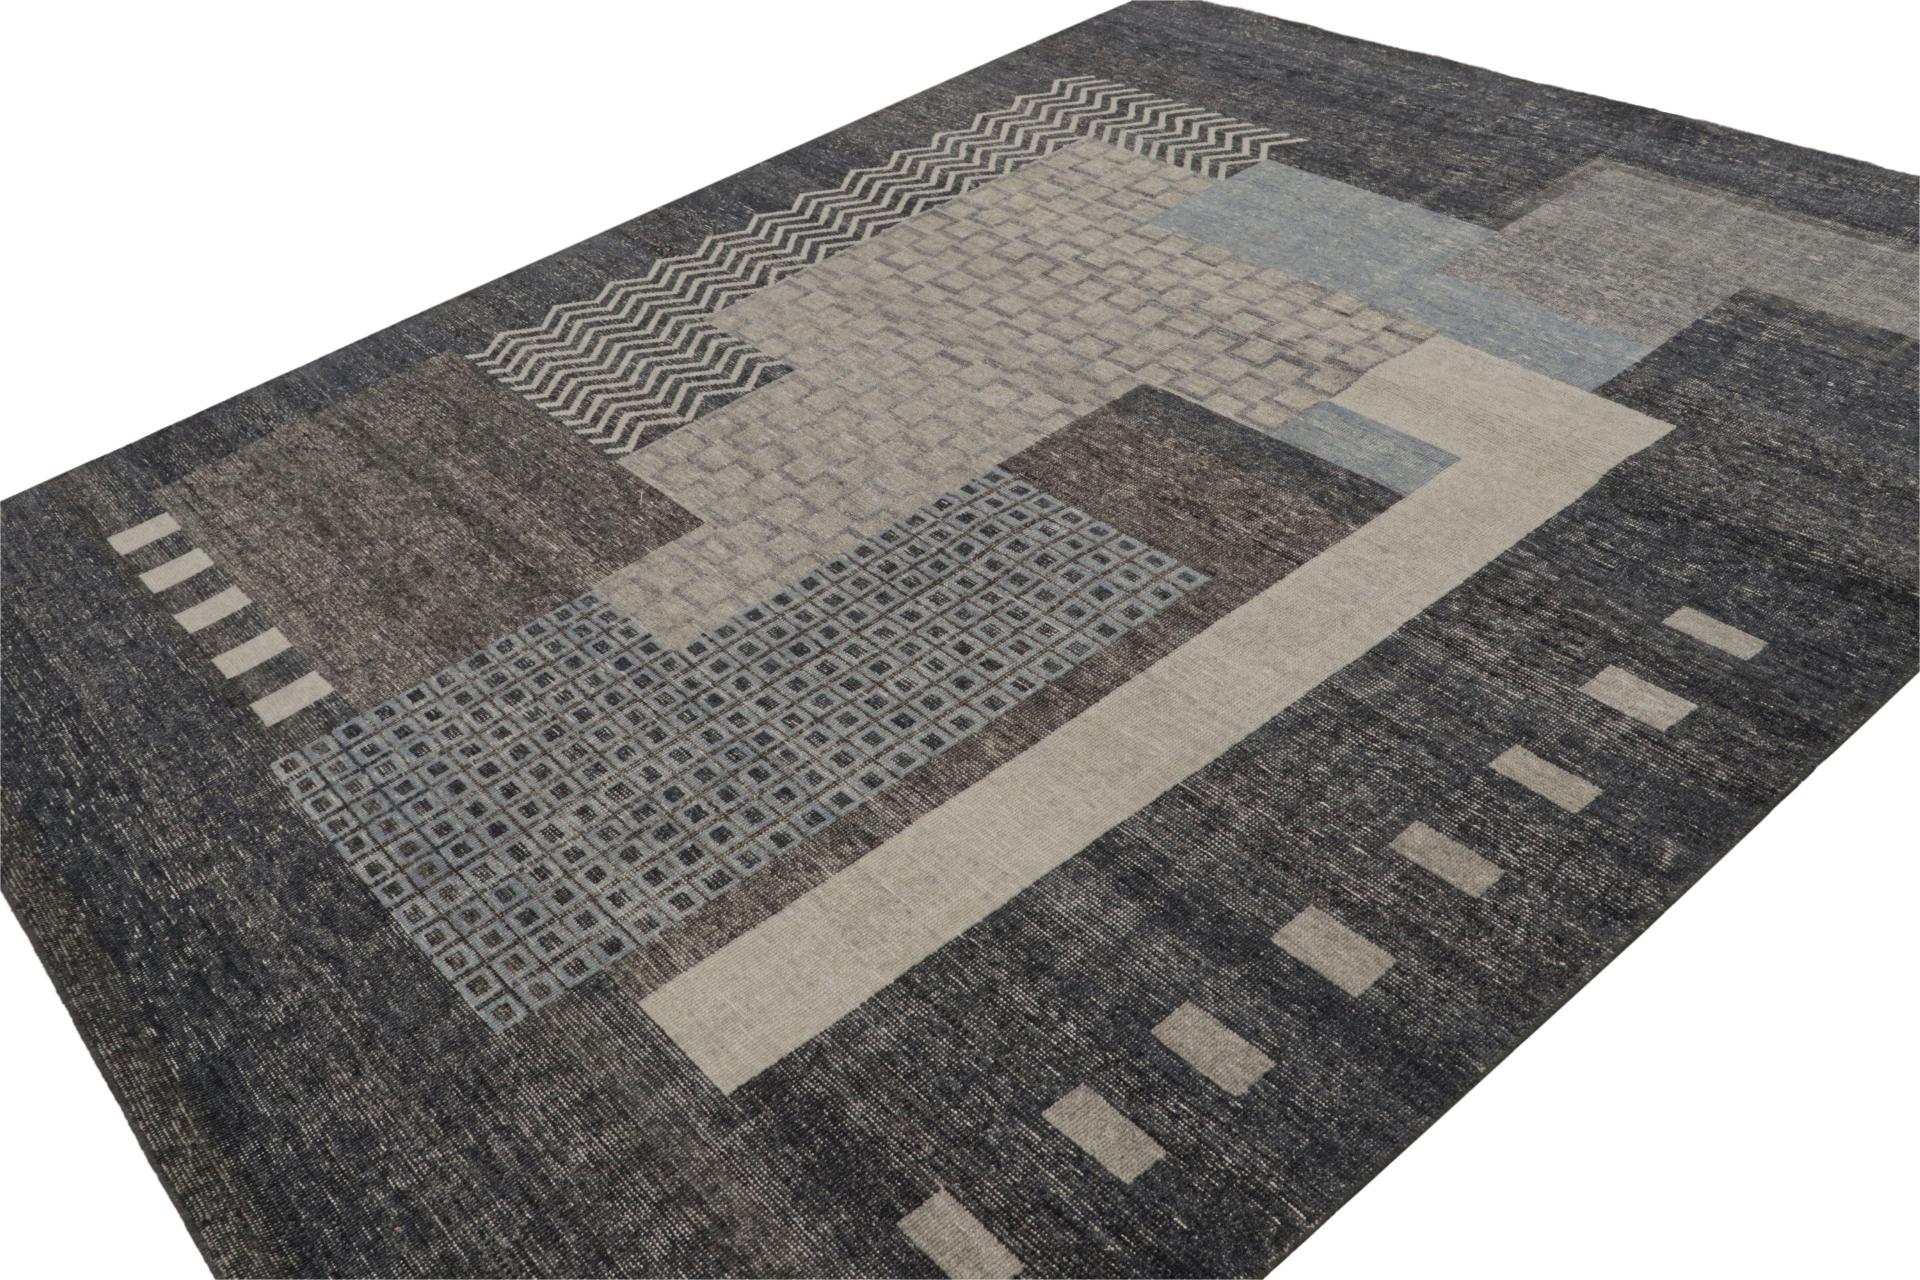 Hand-knotted in wool, this 8x10 modern rug, has been inspired by French Art Deco rugs and similar cubist sensibilities of the European period, a 1920s look in a new textural way to appreciate the style. 

On the Design: 

Admirers of the craft may